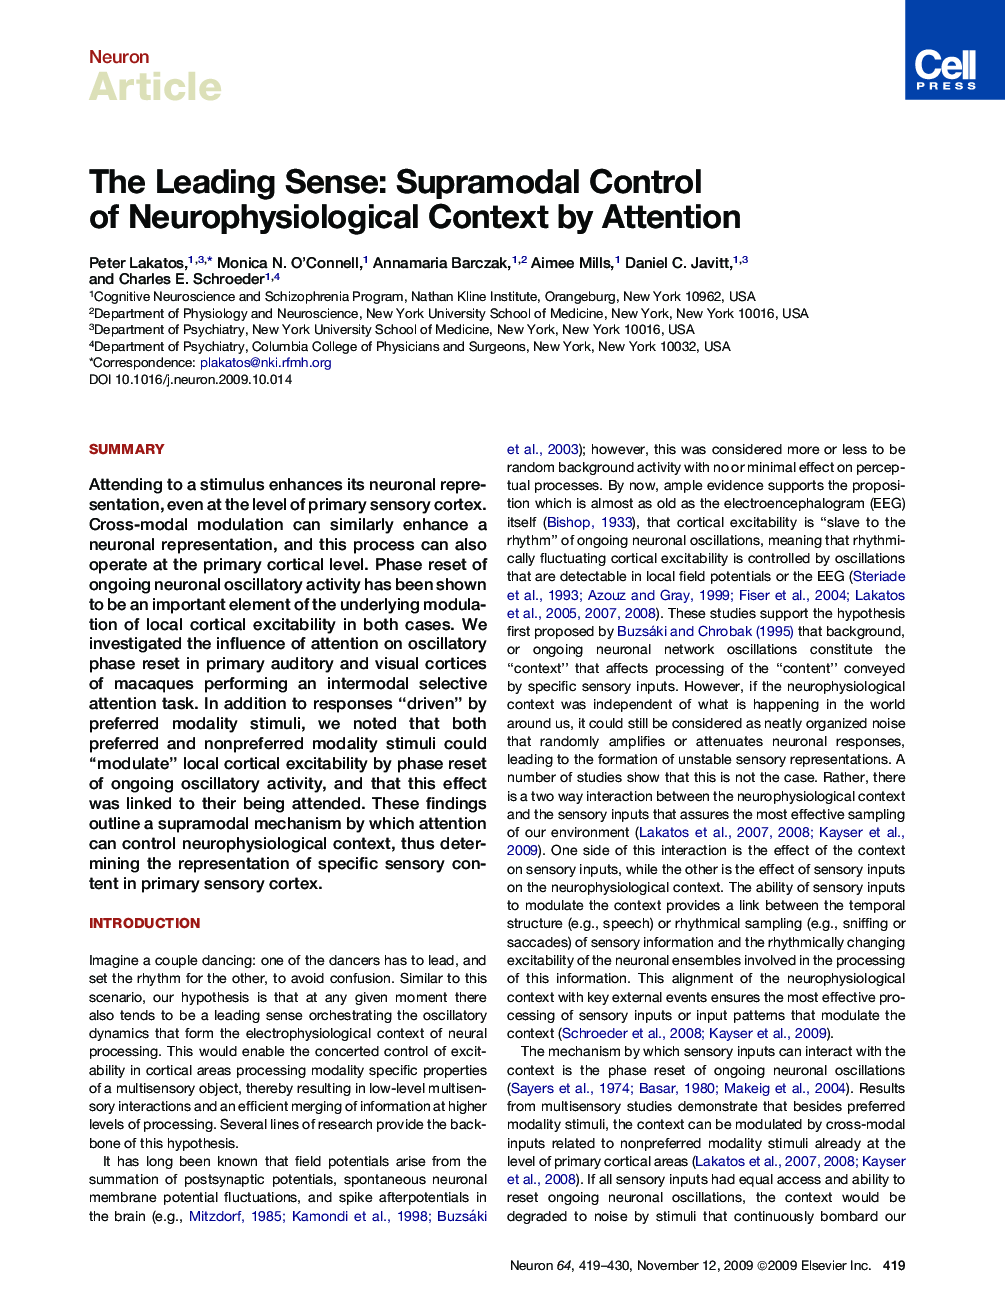 The Leading Sense: Supramodal Control of Neurophysiological Context by Attention